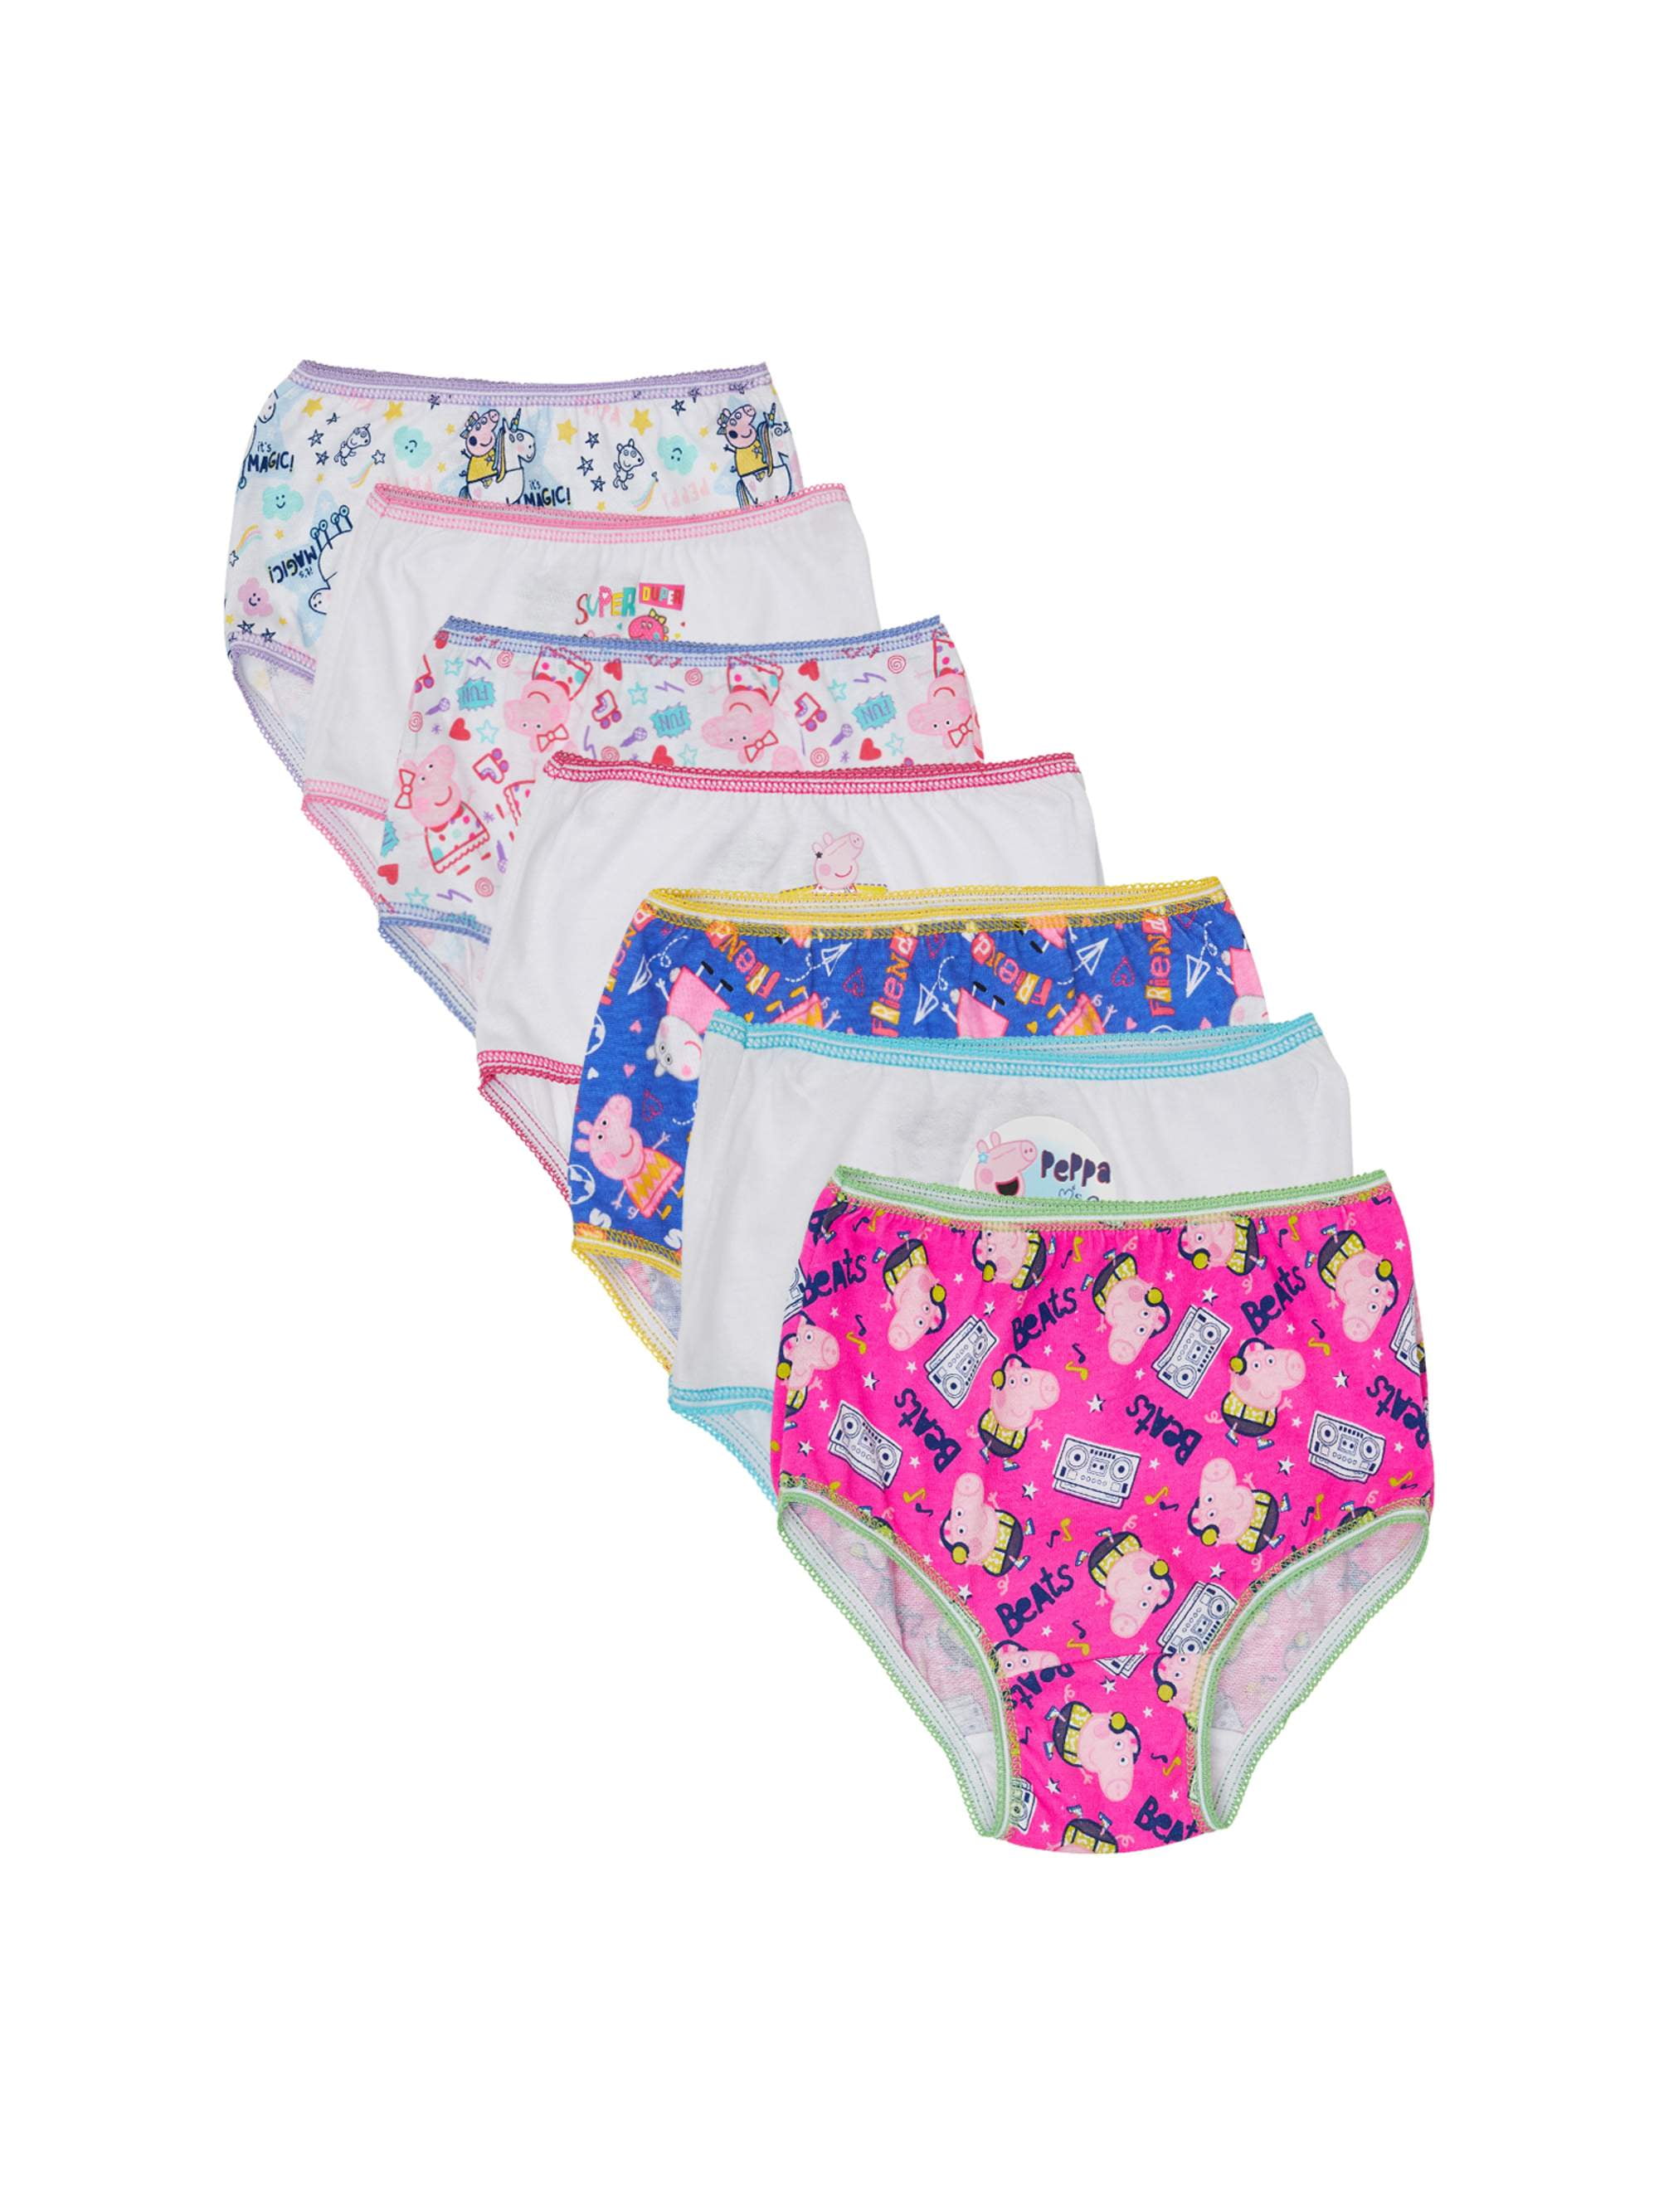 Paw Patrol Toddler Girl Briefs, 7-Pack, Sizes 2T-4T 